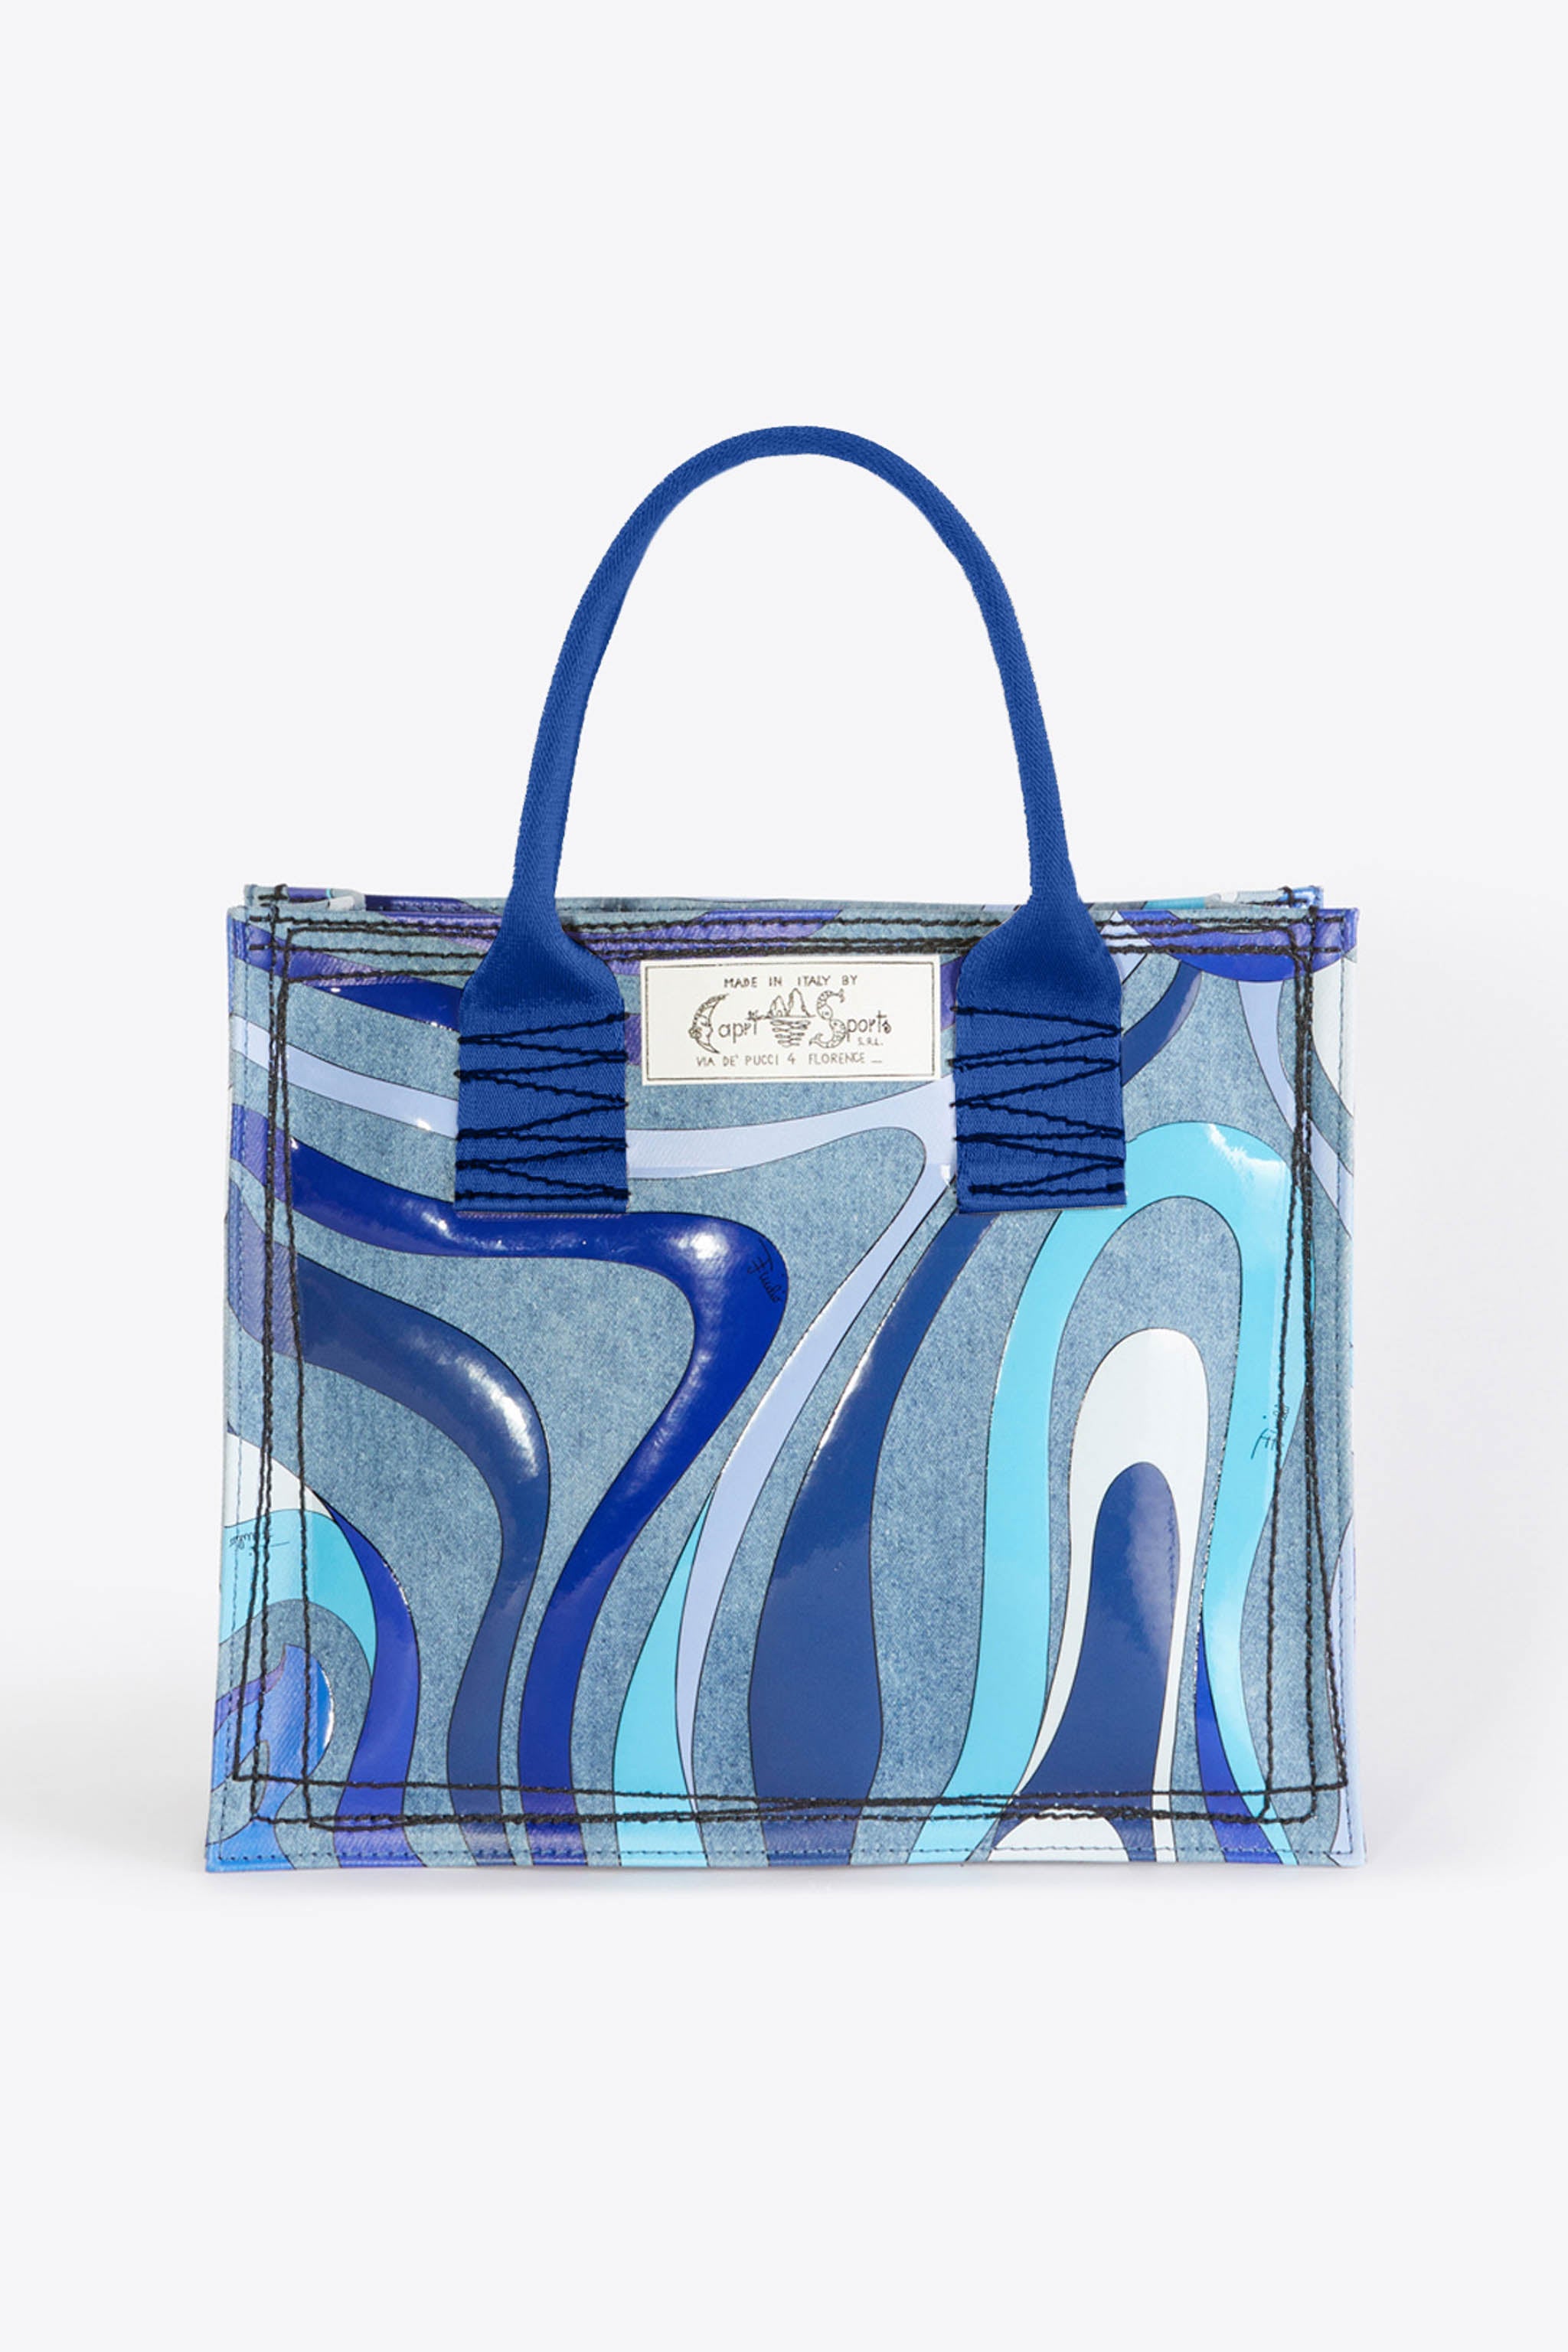 Emilio Pucci Women's Abstract Print Open Tote Bag